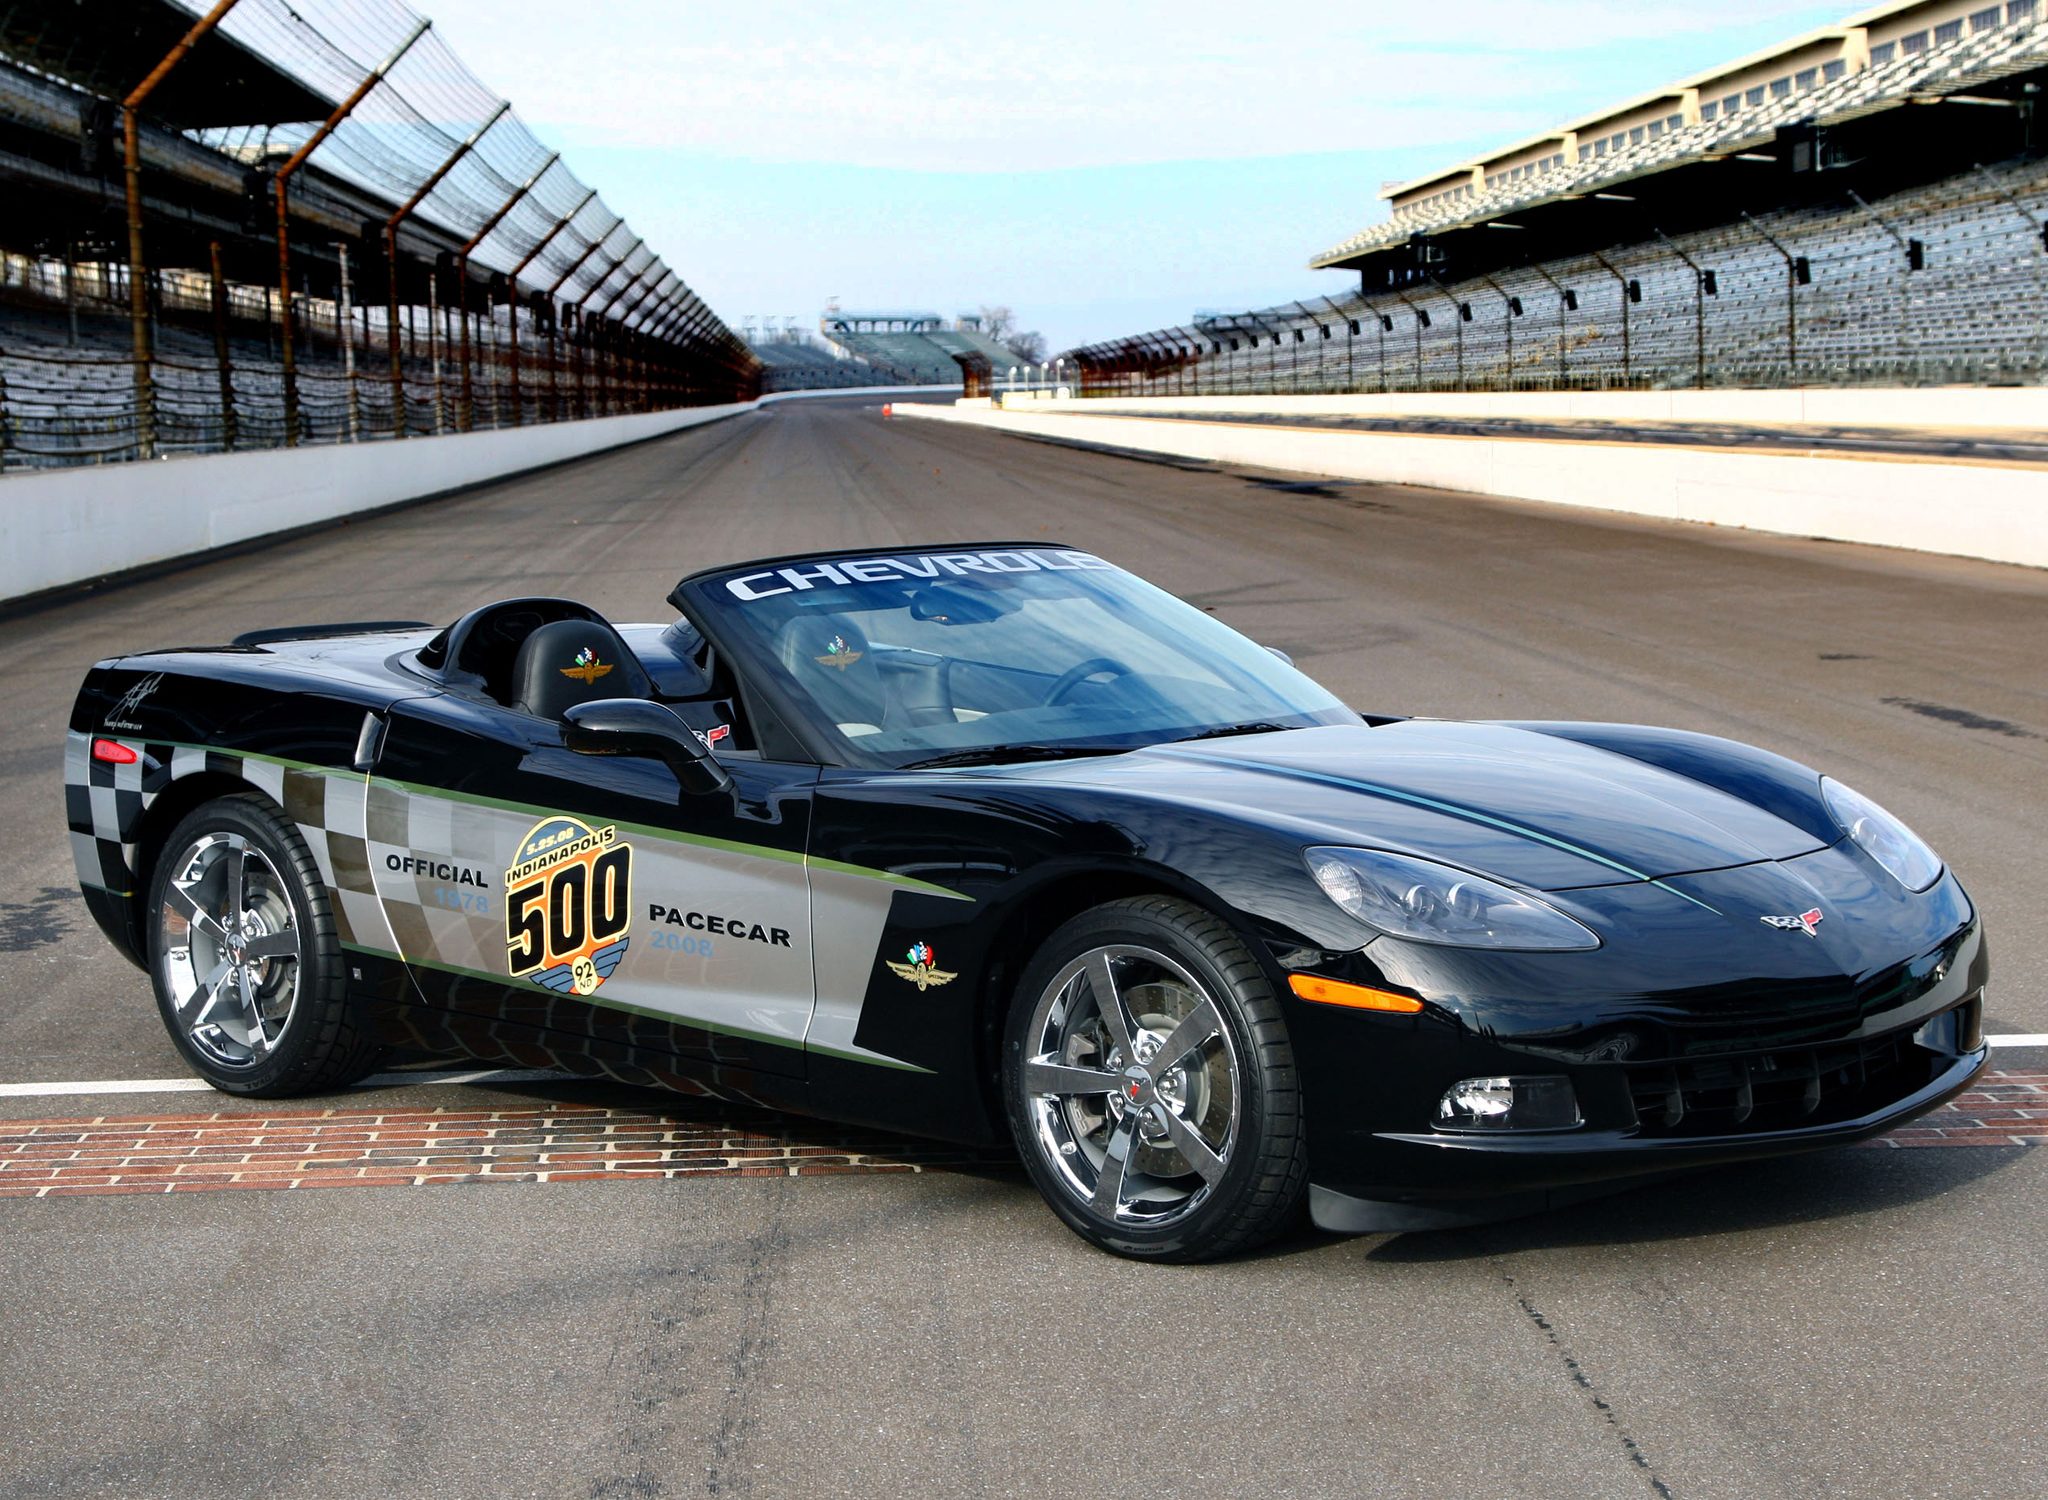 Corvette Of The Day: 2008 Chevrolet Corvette Convertible 30th Anniversary Indy 500 Pace Car